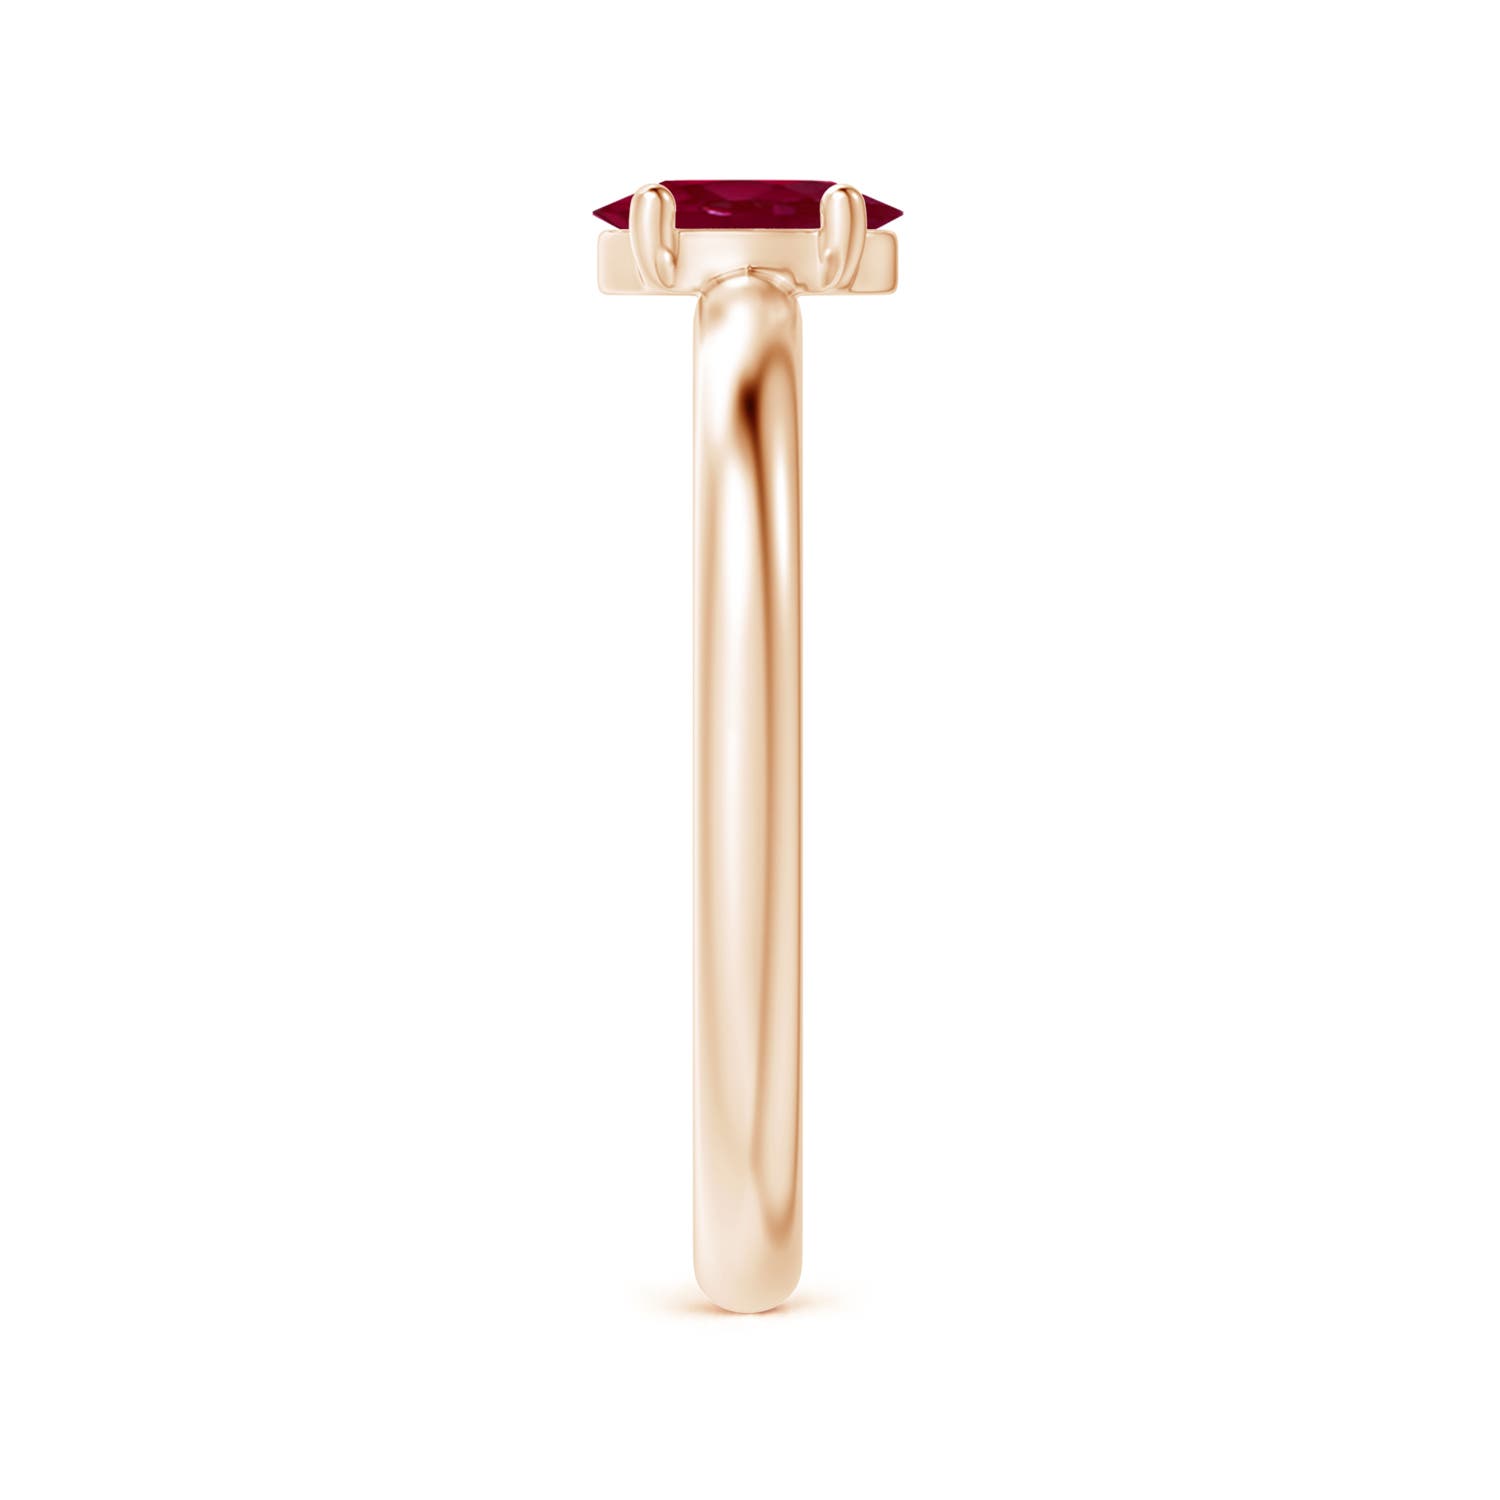 A - Ruby / 0.6 CT / 14 KT Rose Gold